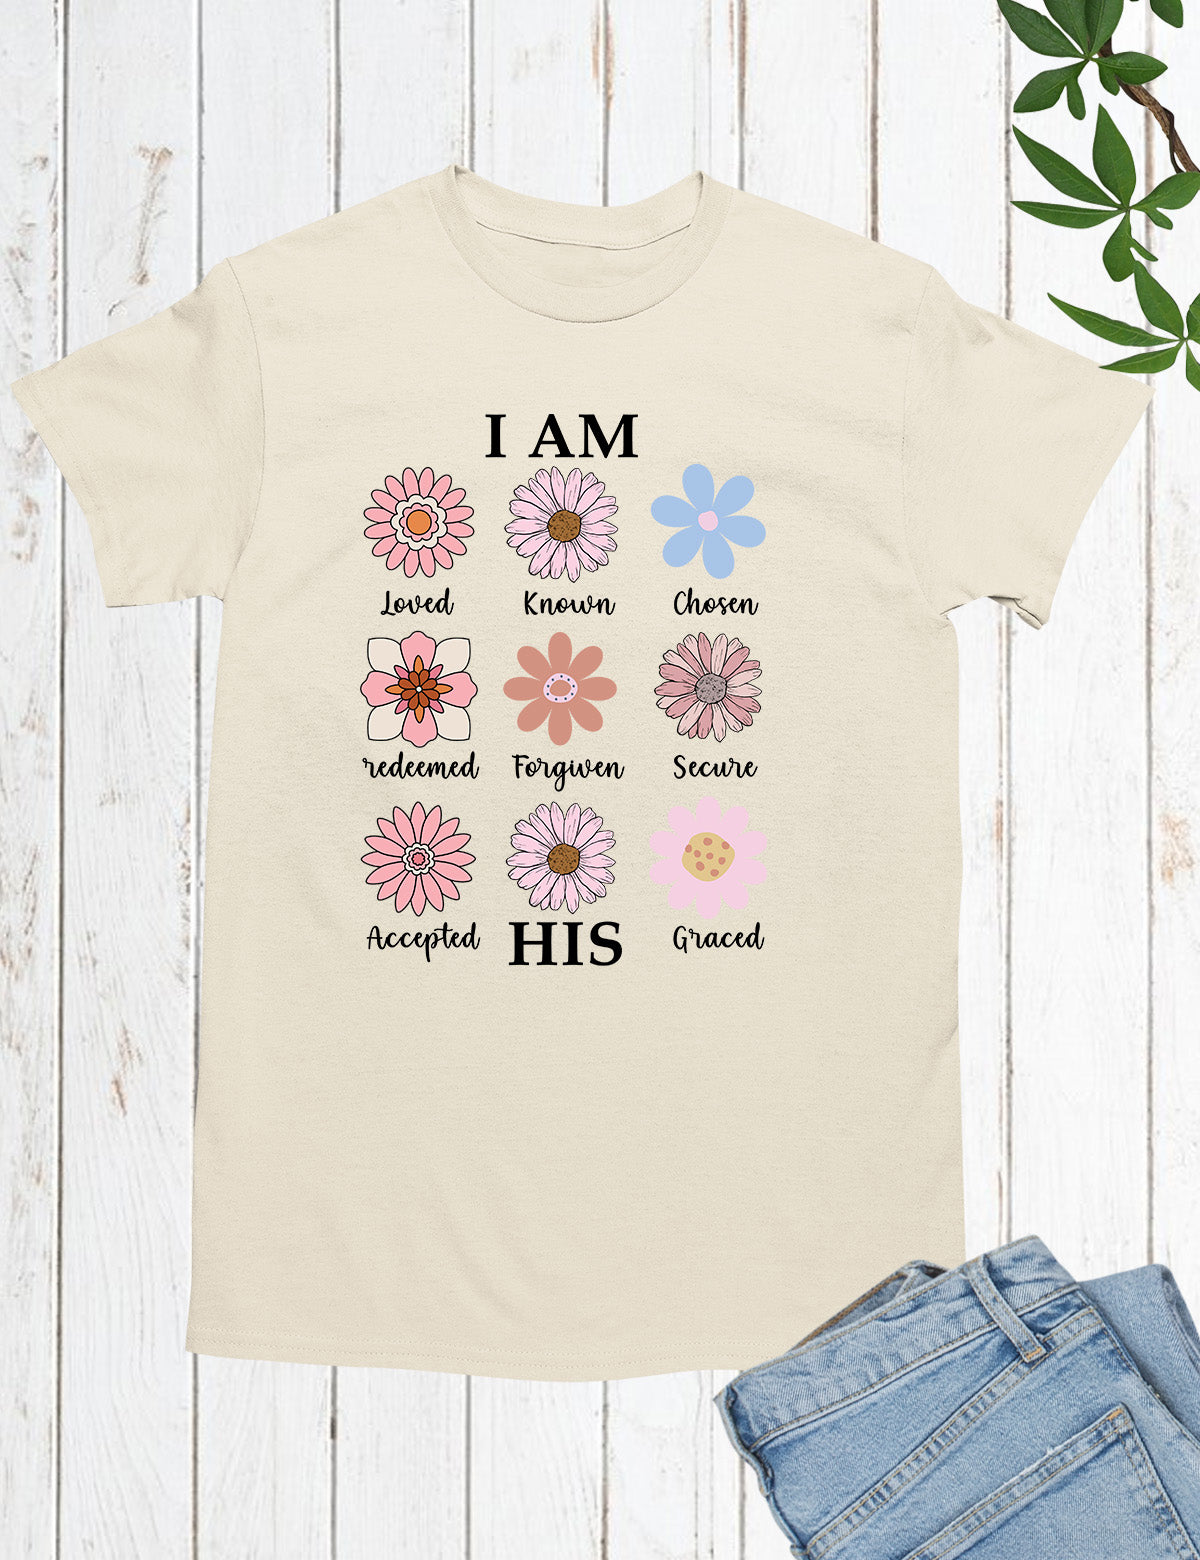 I AM HIS  Loved Known Chosen Redeemed Forgiven Secure Accepted Graced Christian Vintage Distressed Flowers Shirt